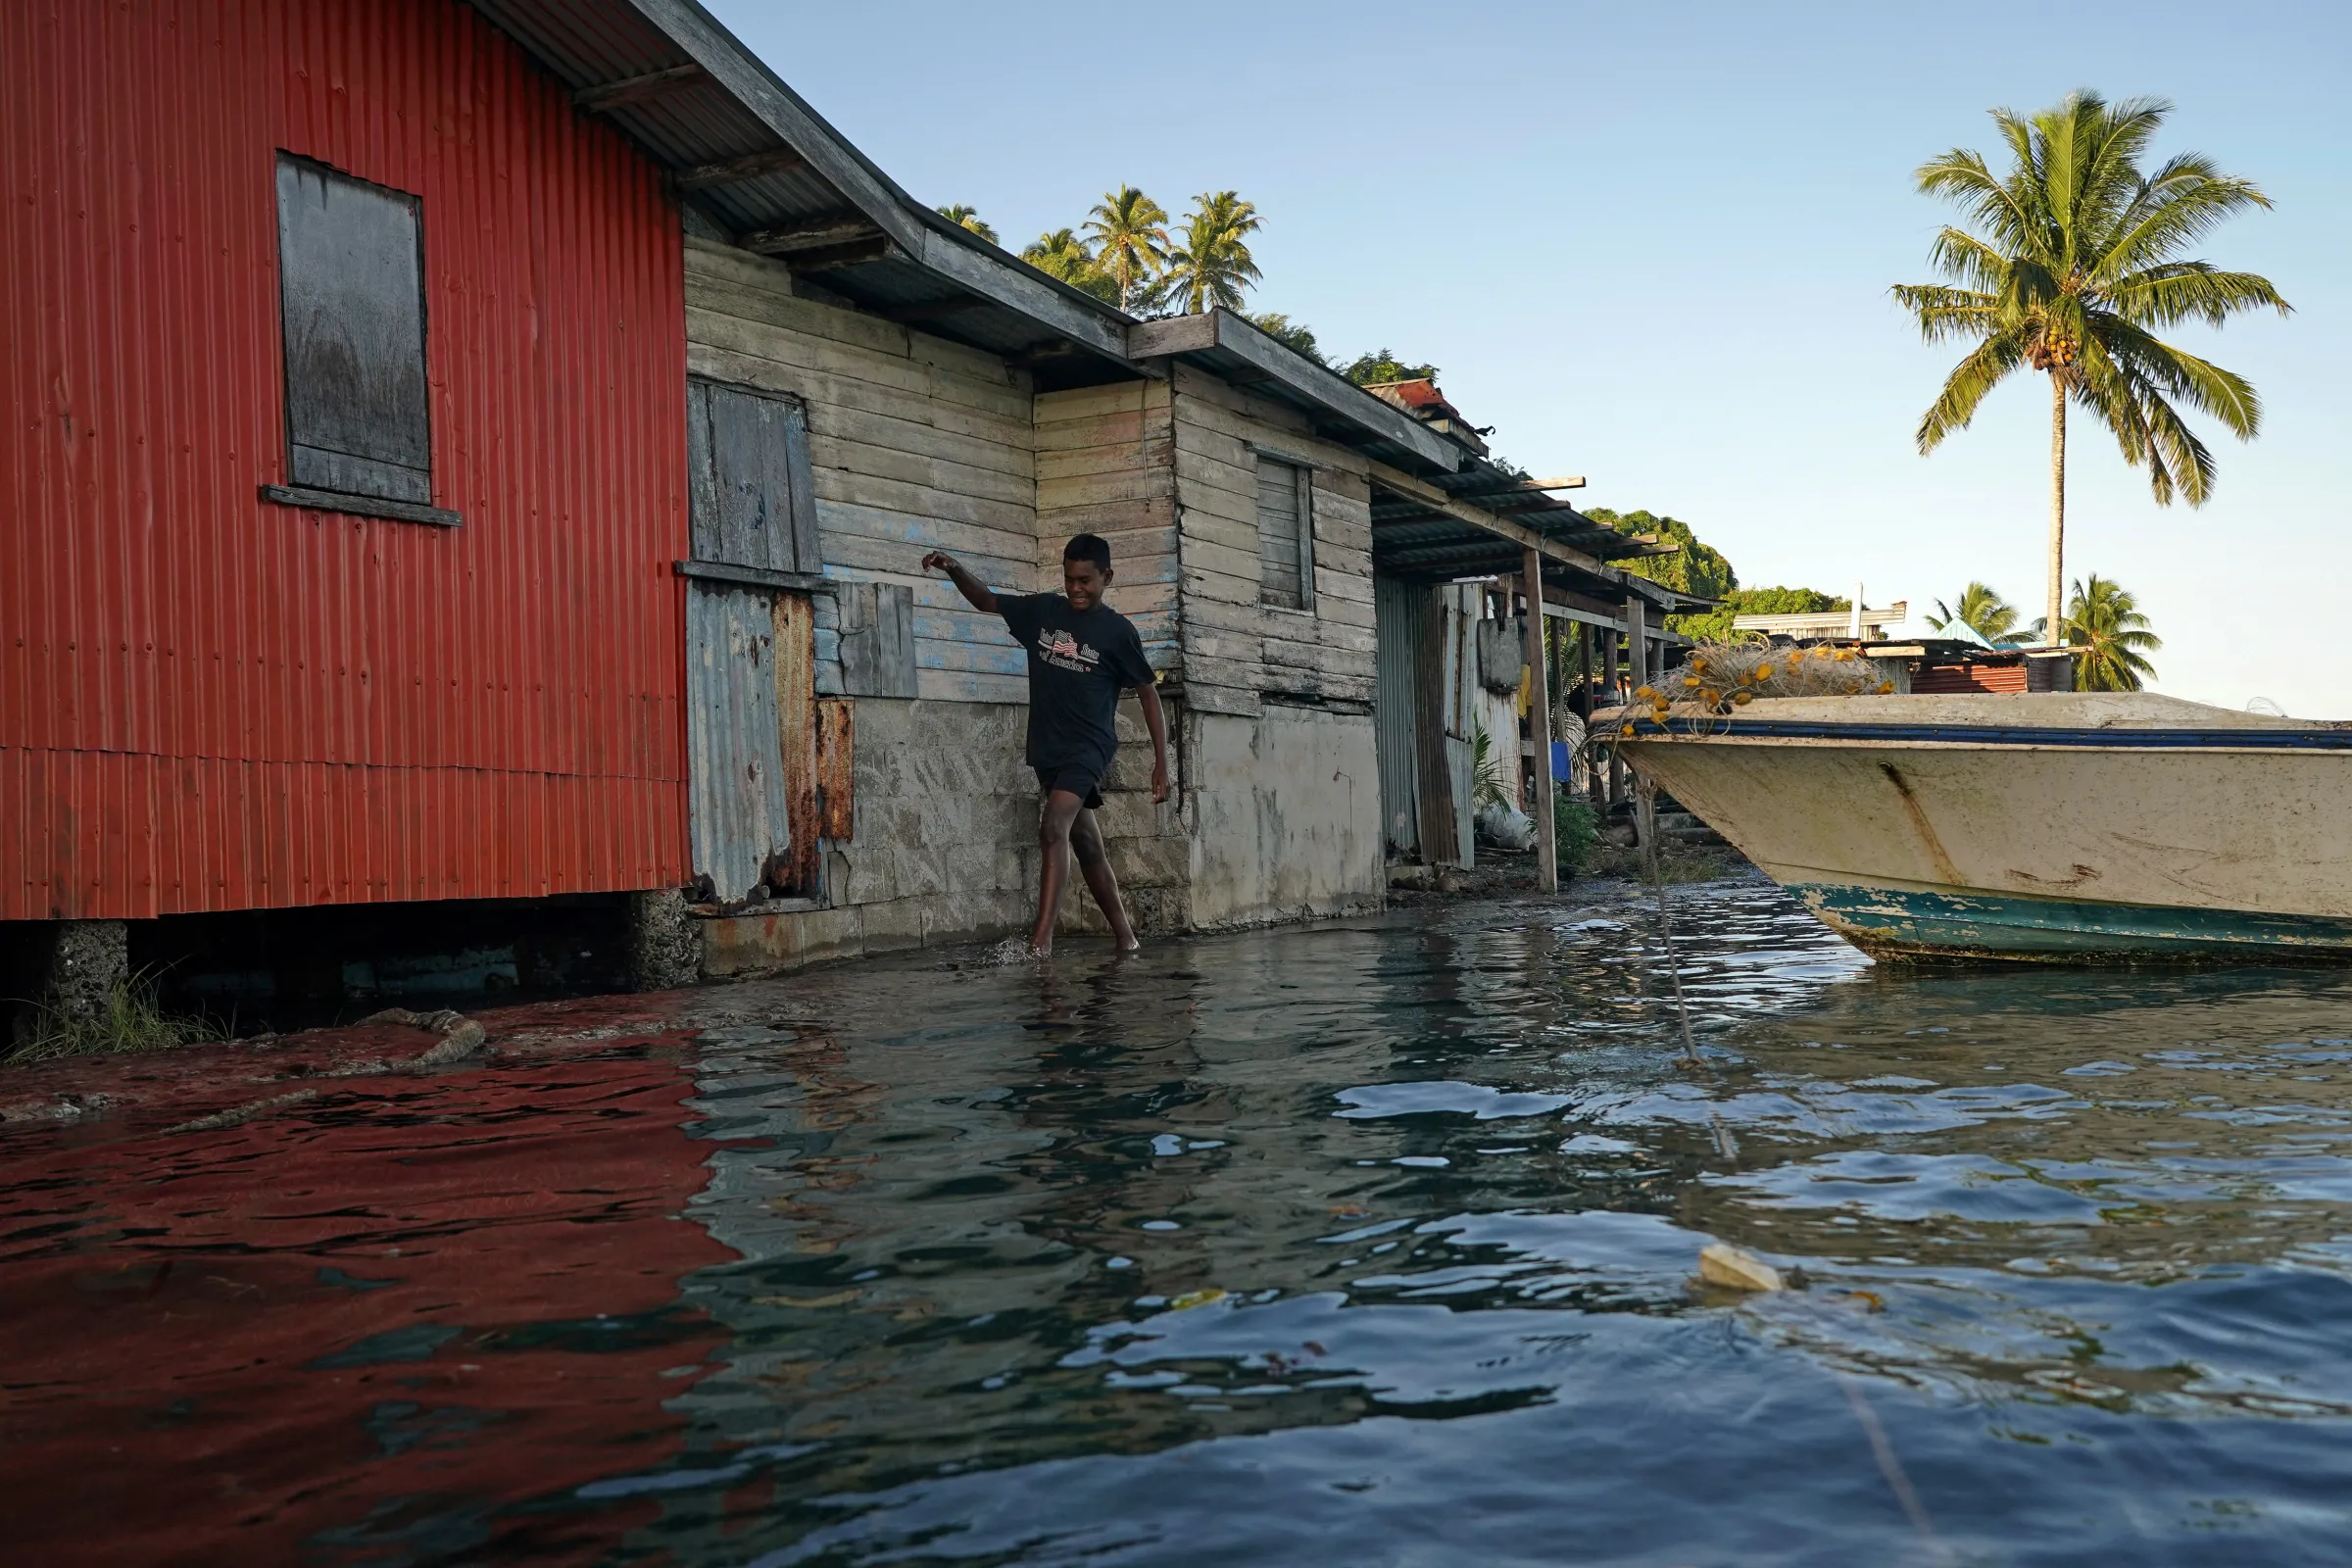 Local boy wades through seawater flooding over an ineffective sea wall at high tide, as the community experiences flooding in Serua Village, Fiji, July 15, 2022. REUTERS/Loren Elliott